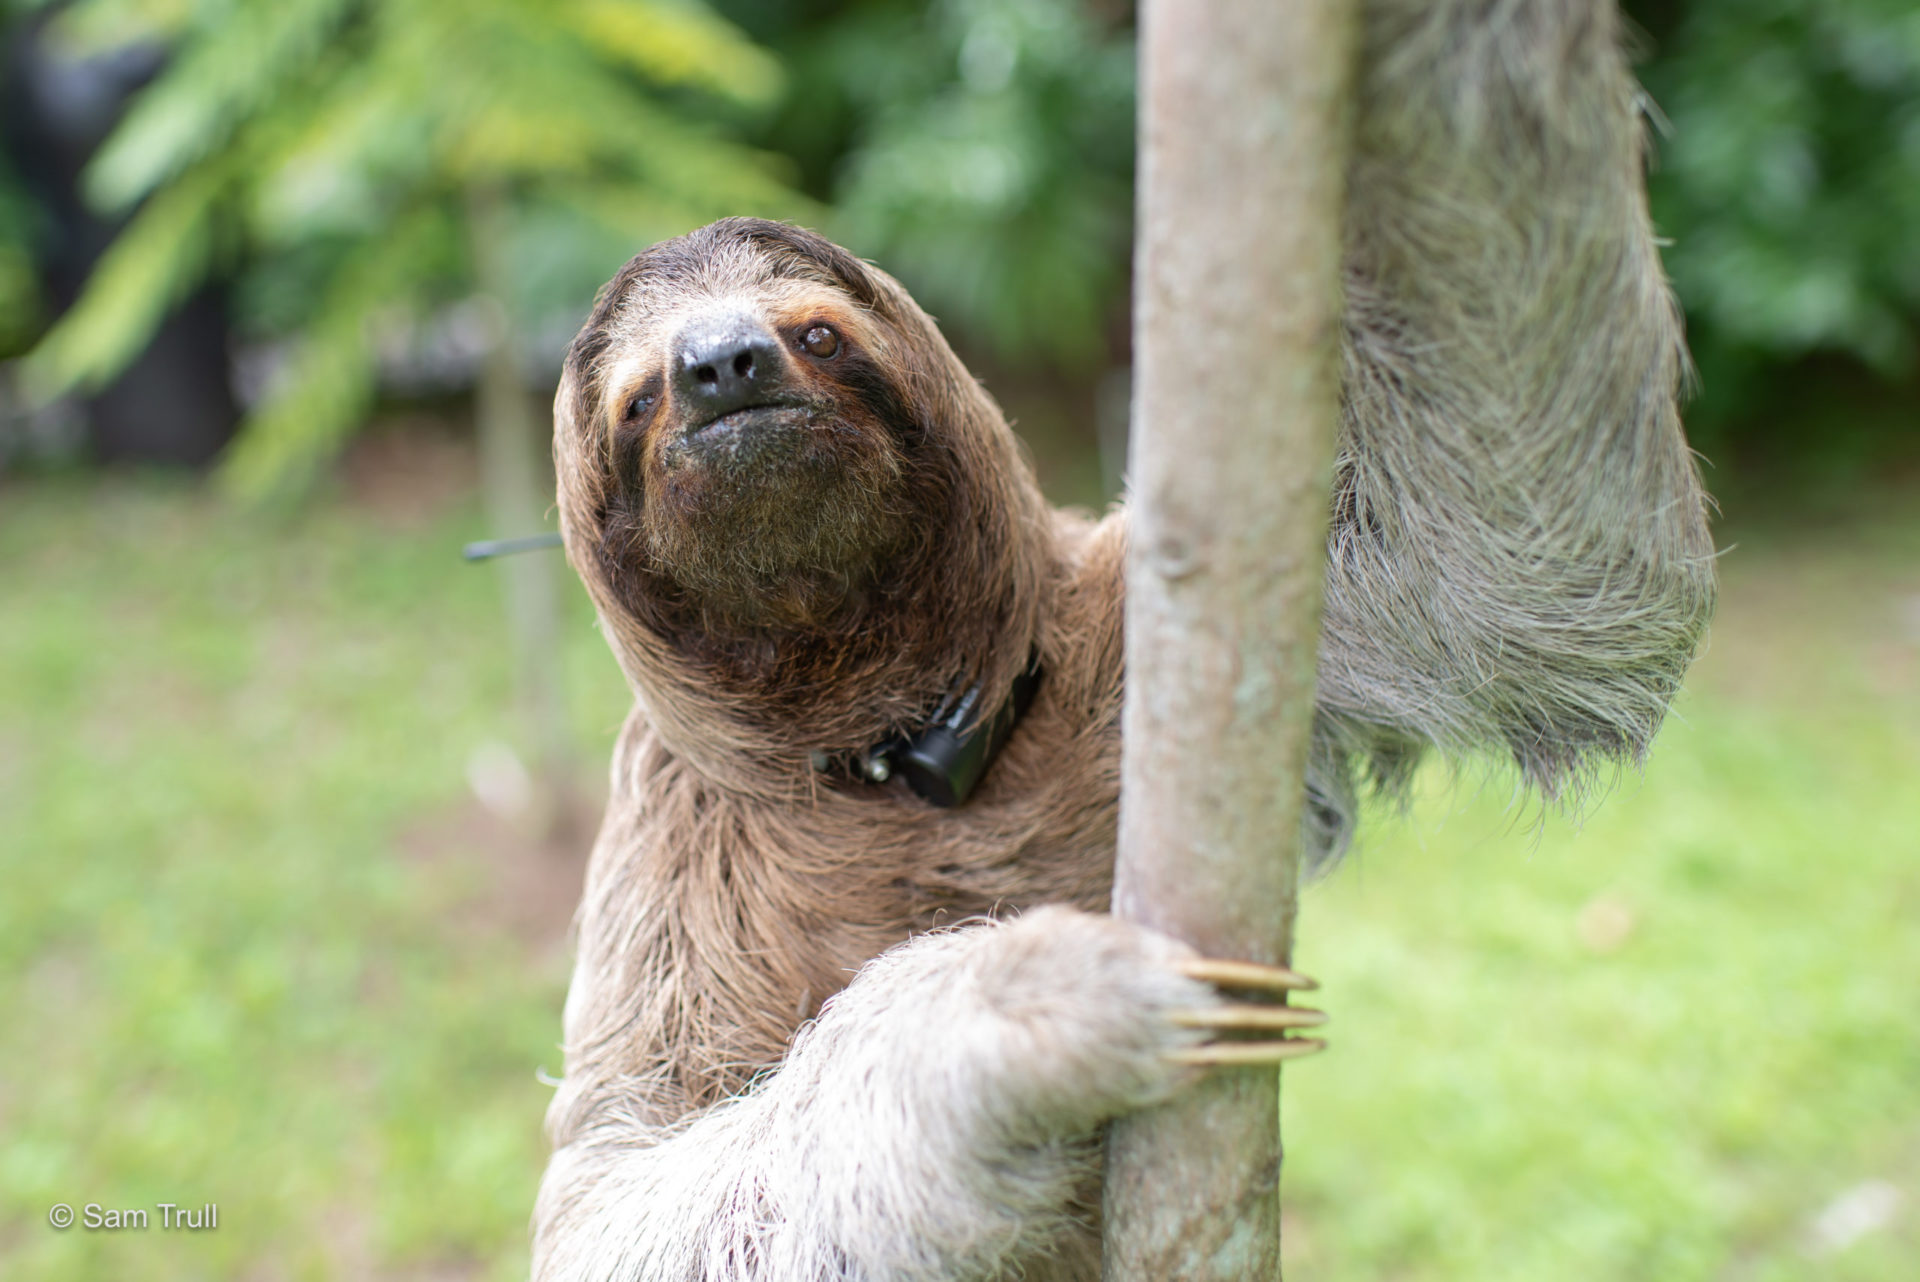 Merlin the sloth recovered thanks to Monster's WiSH Lab